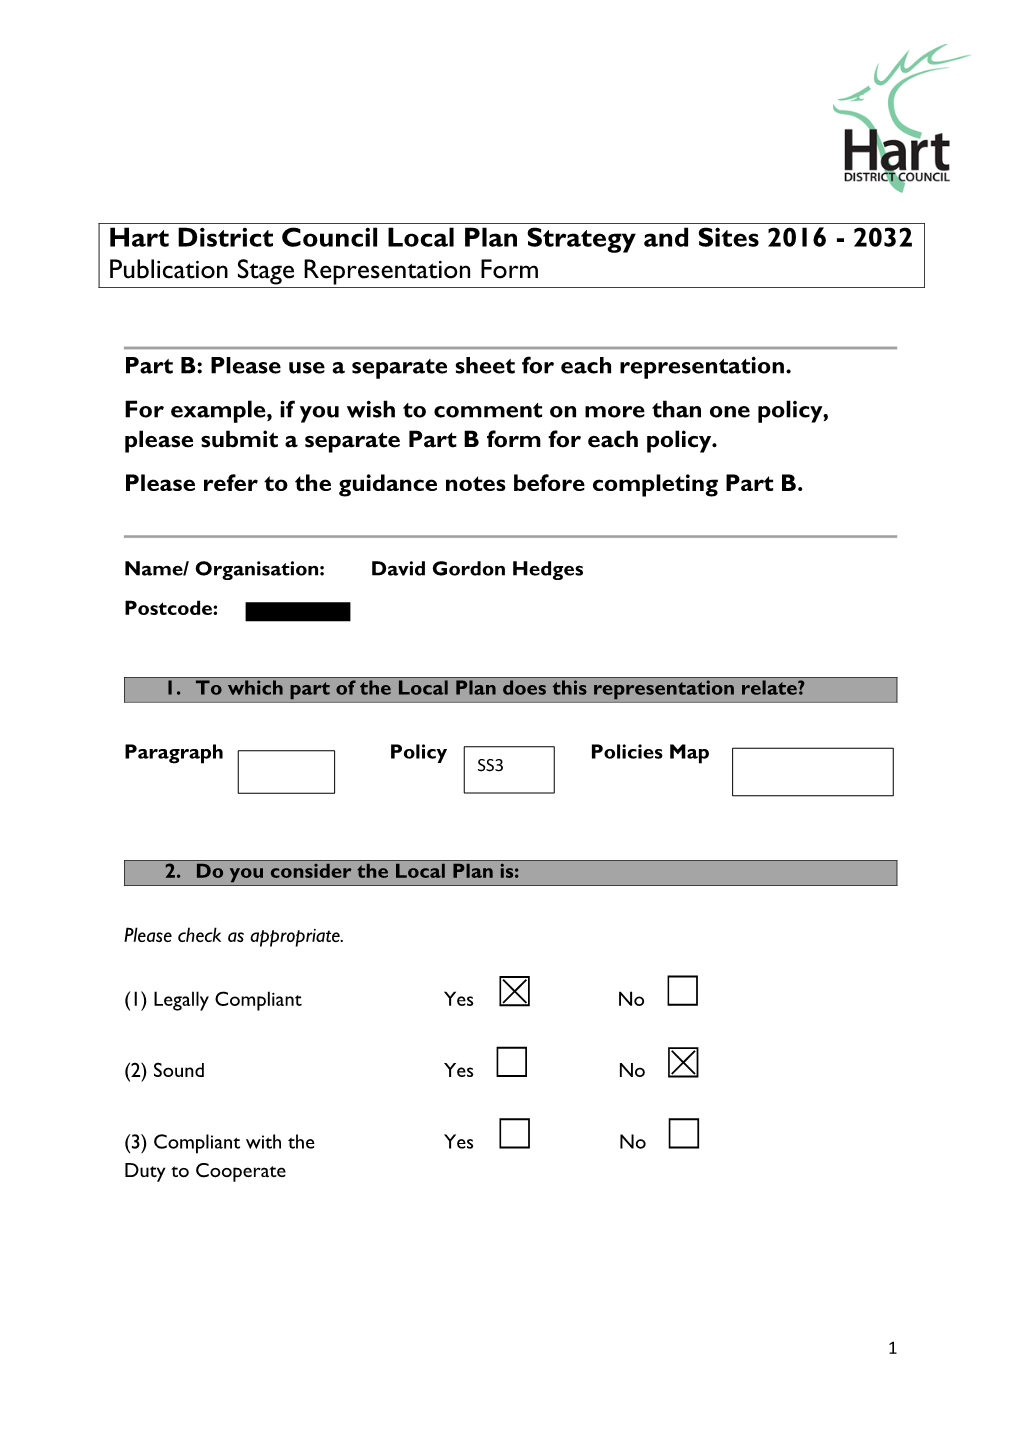 Hart District Council Local Plan Strategy and Sites 2016 - 2032 Publication Stage Representation Form